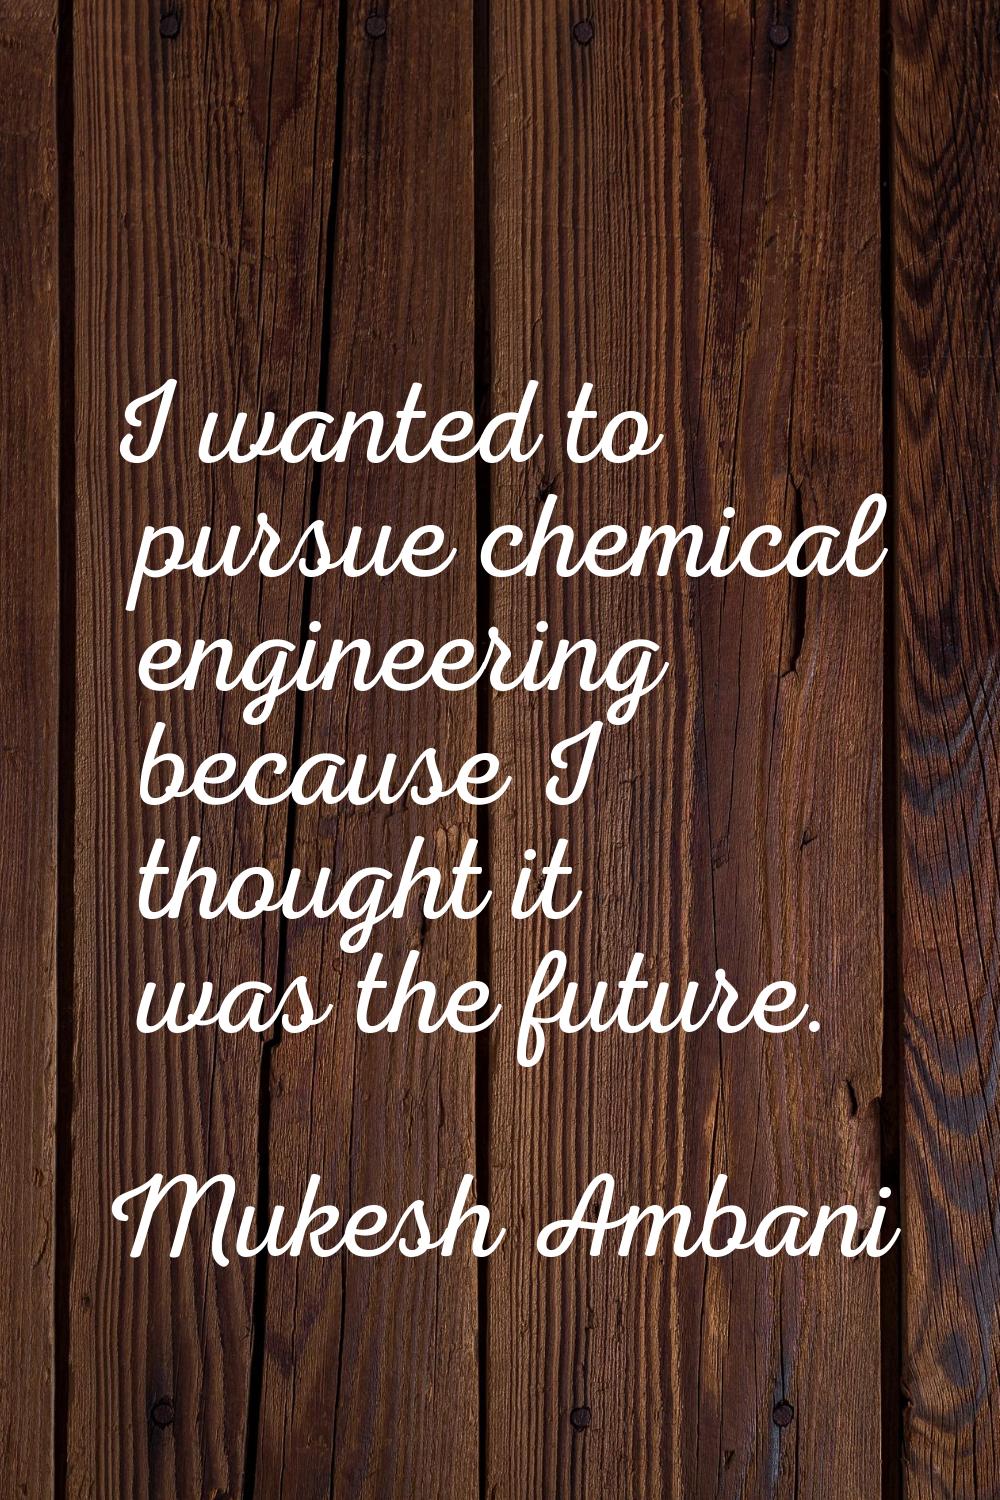 I wanted to pursue chemical engineering because I thought it was the future.